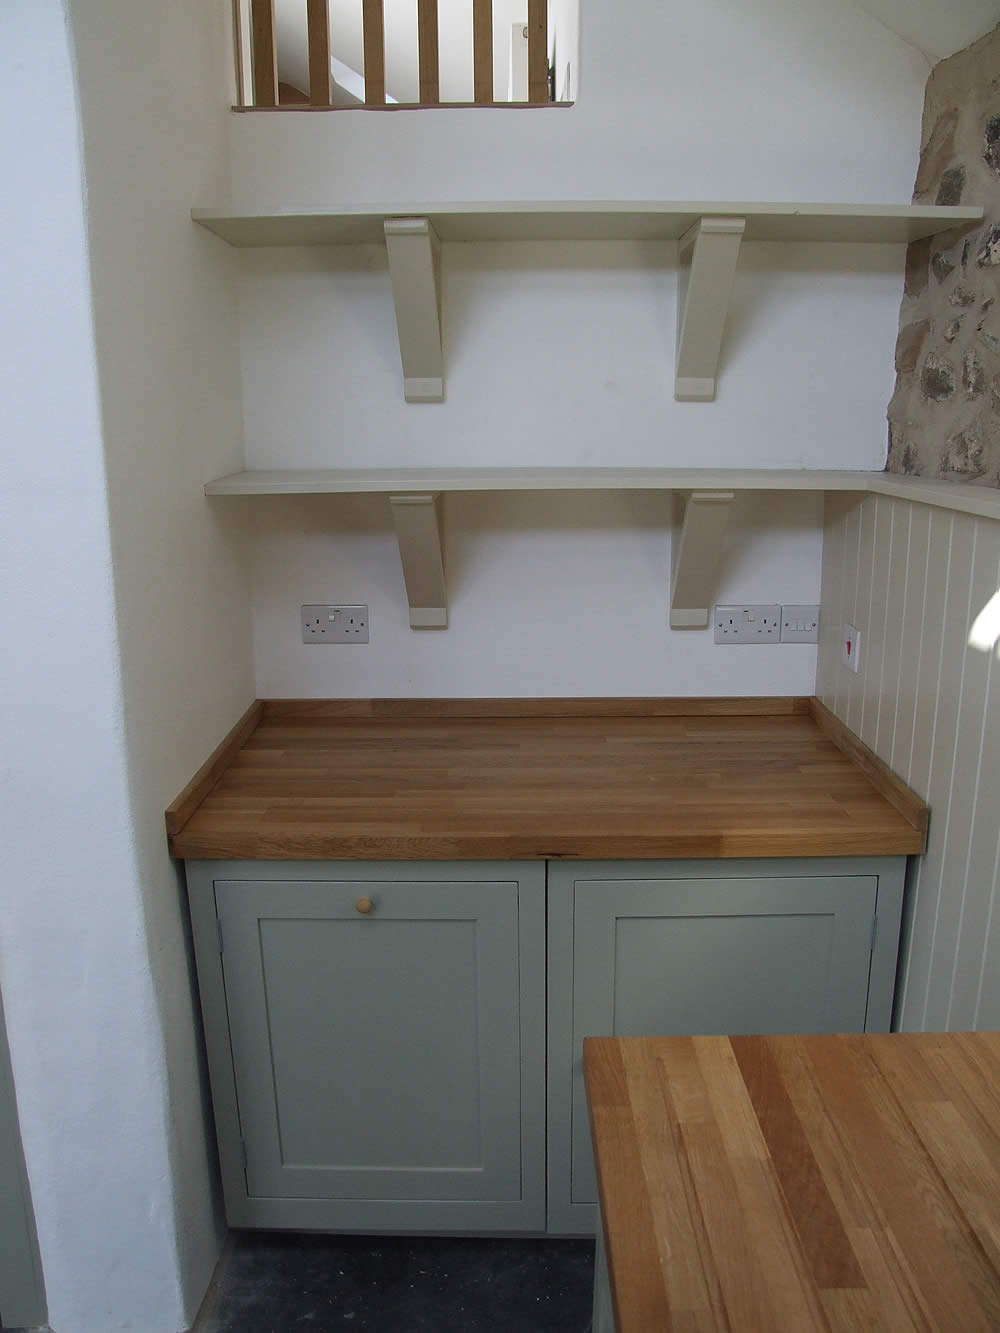 Detail of the painted Shaker kitchen showing the integrated appliance doors & gallows bracket painted shelves